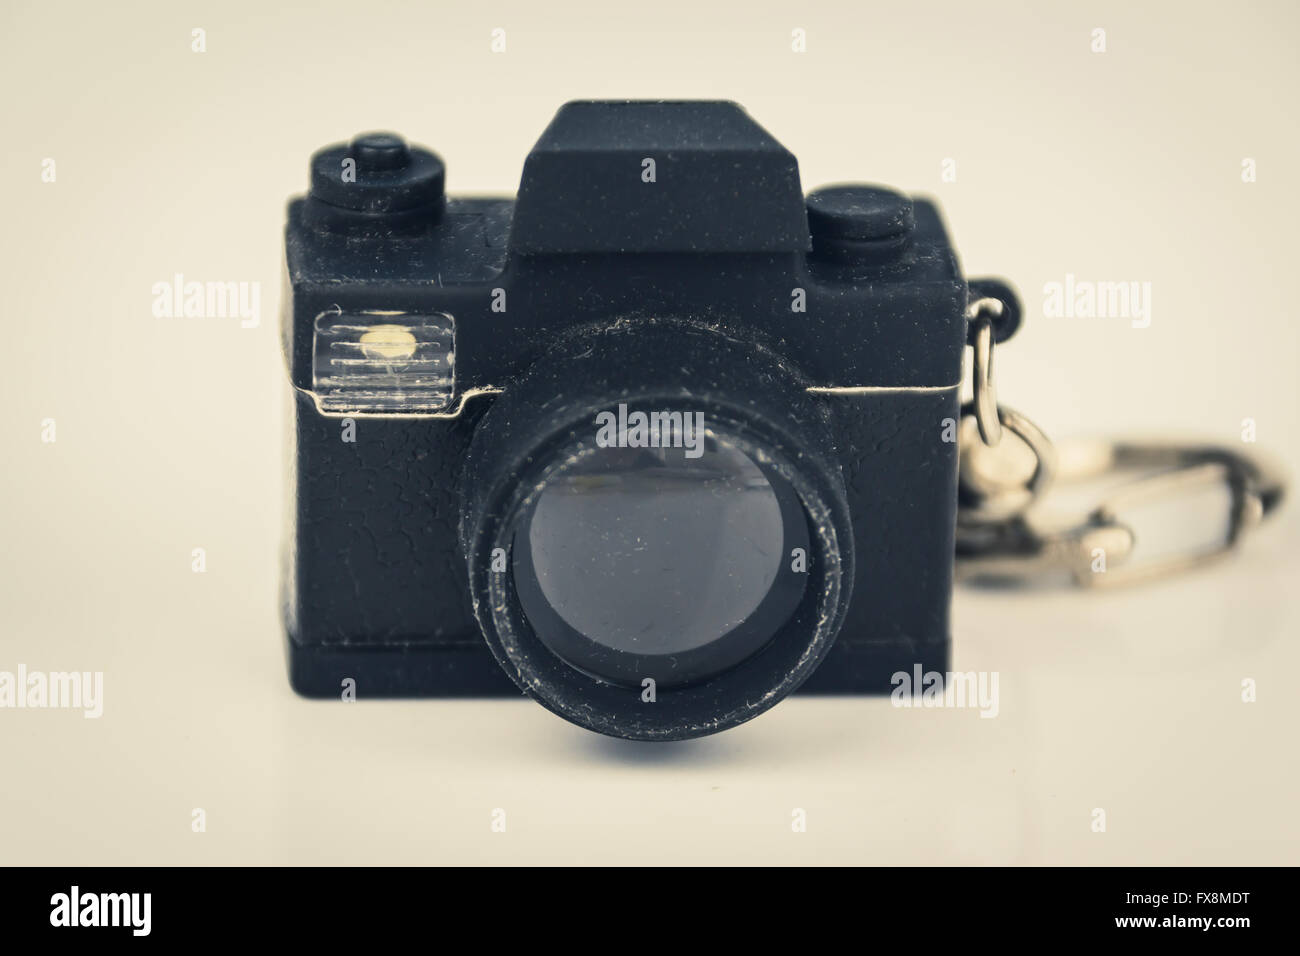 miniature photo camera toy - photography concept, vintage filter Stock Photo